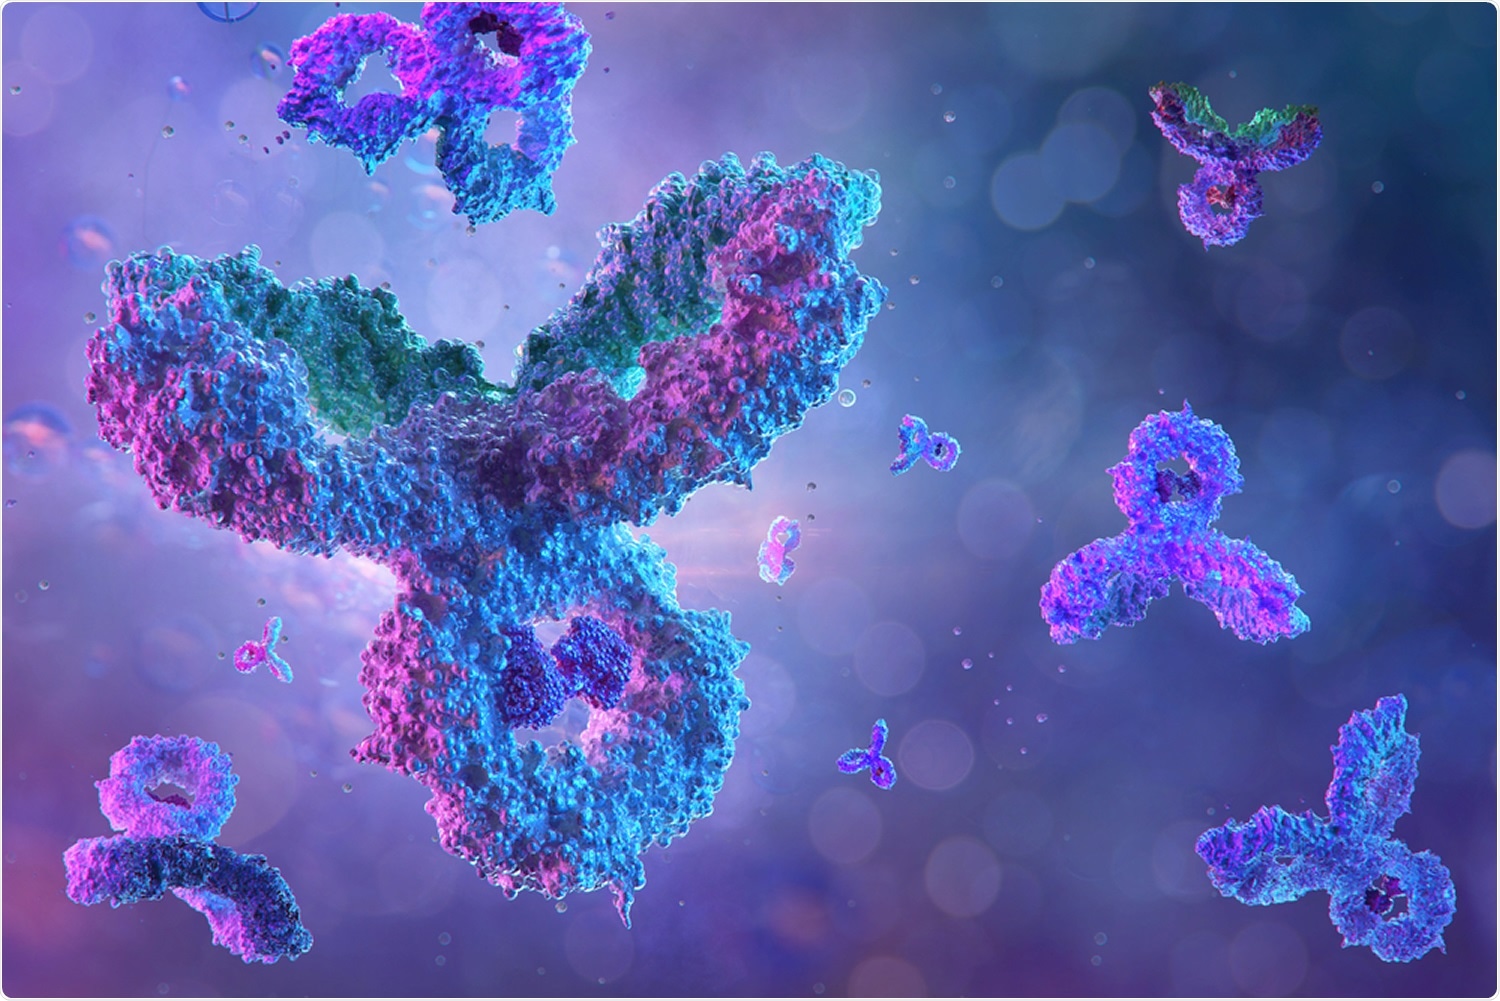 Study: Stable IgG-antibody levels in patients with mild SARS-CoV-2 infection. Image Credit: Corona Borealis Studio /  Shutterstock